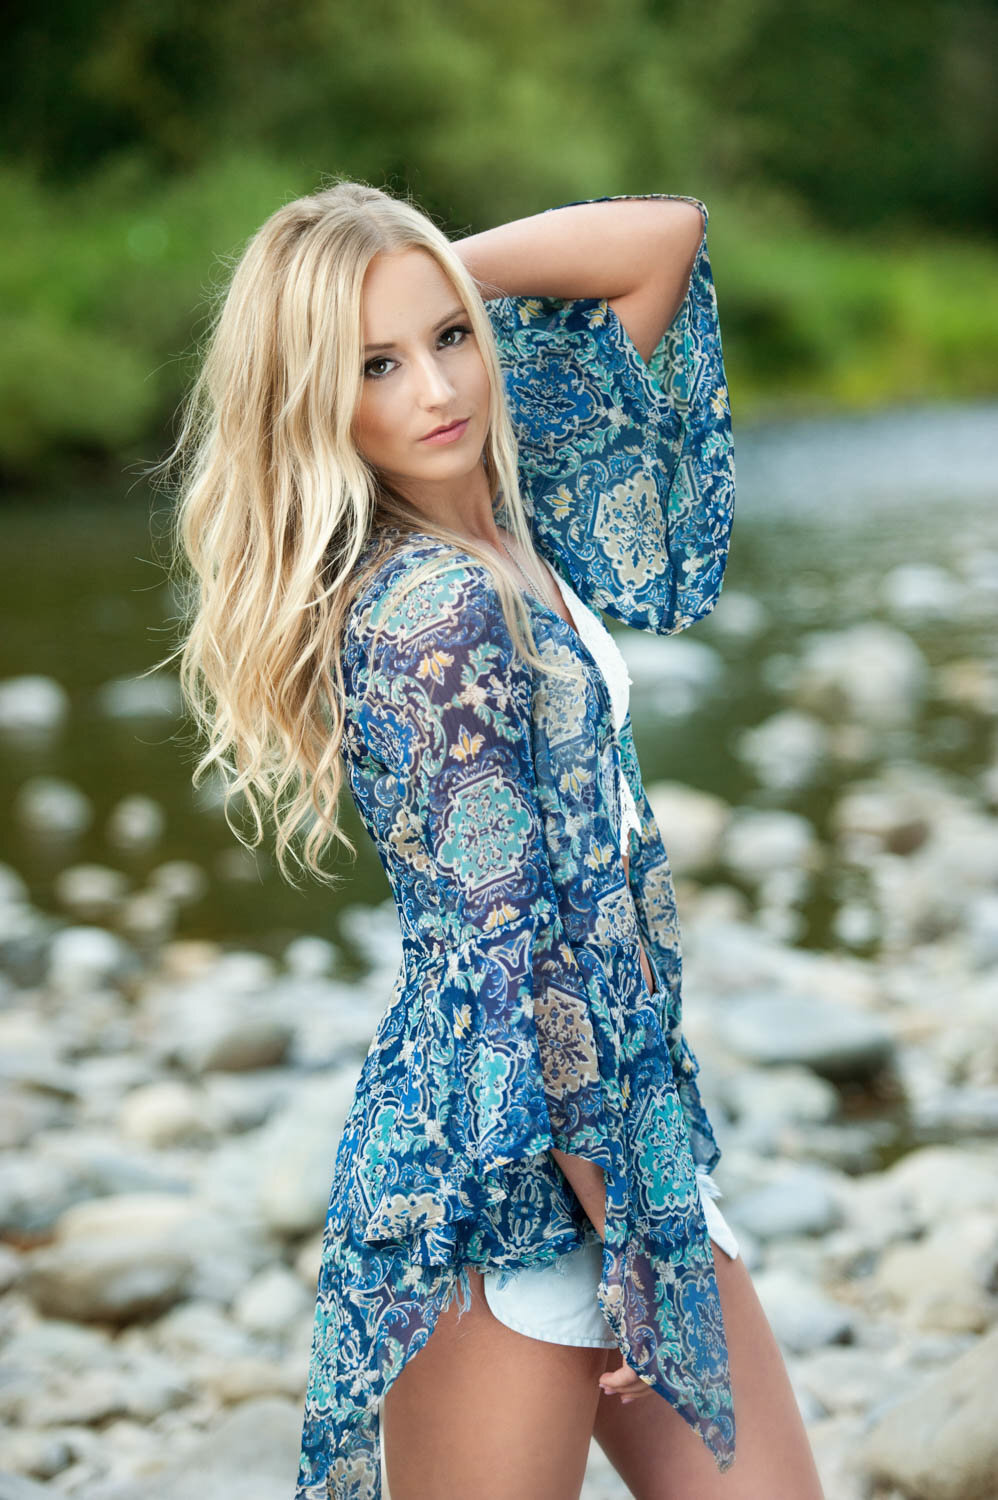 senior portrait of girl with patterned shirt in river